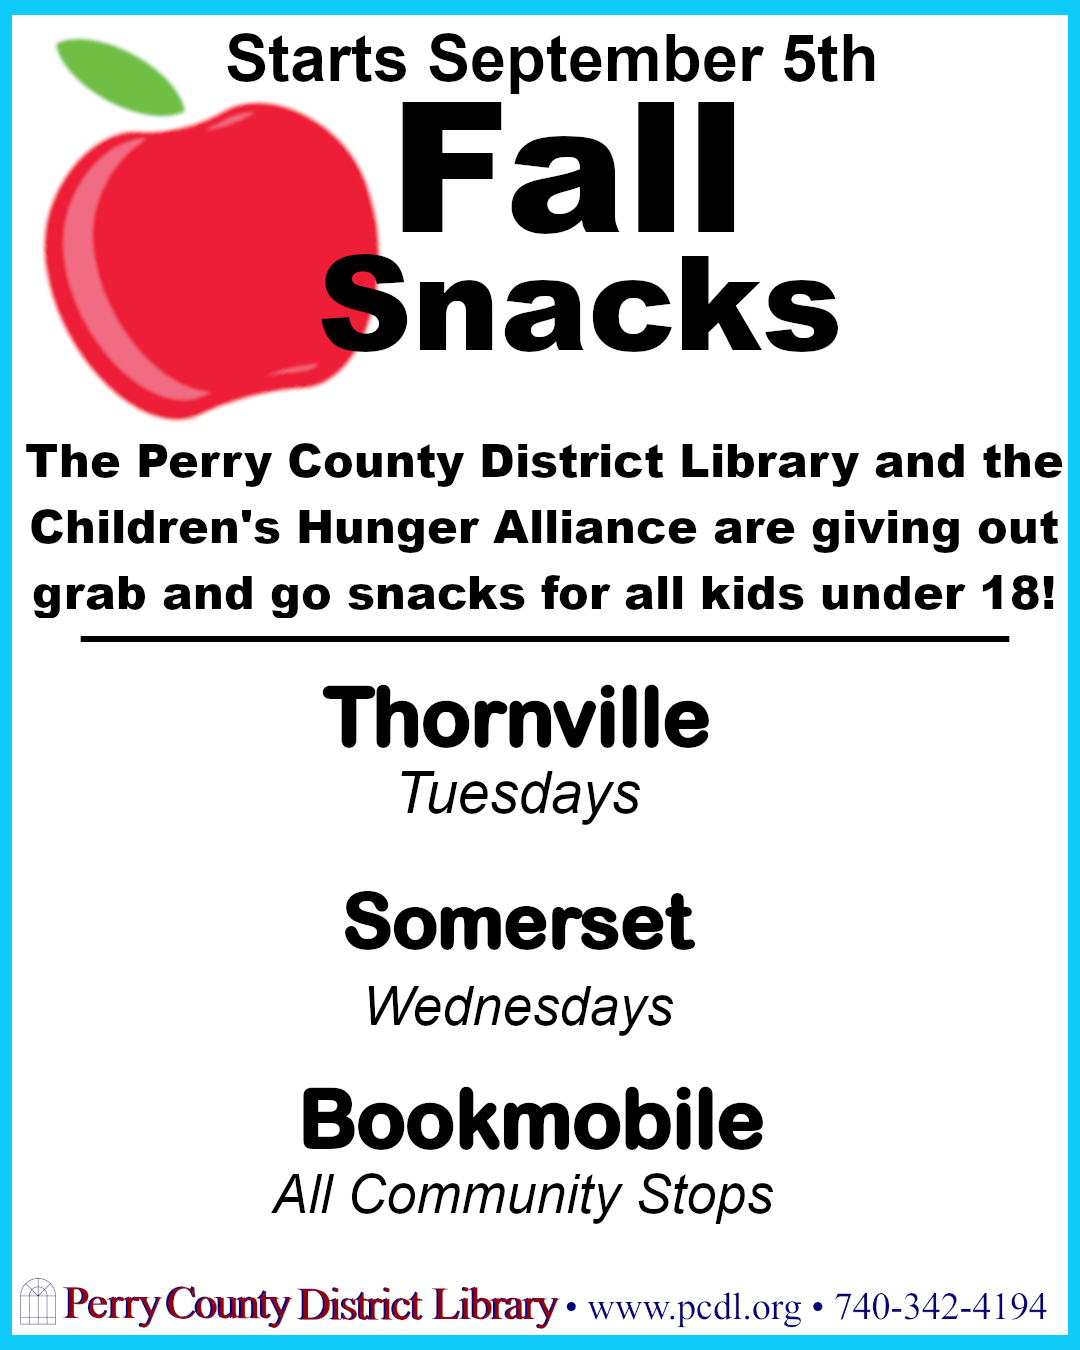 Thornville and somerset snacks all day whenever open, and at all bookmobile community stops